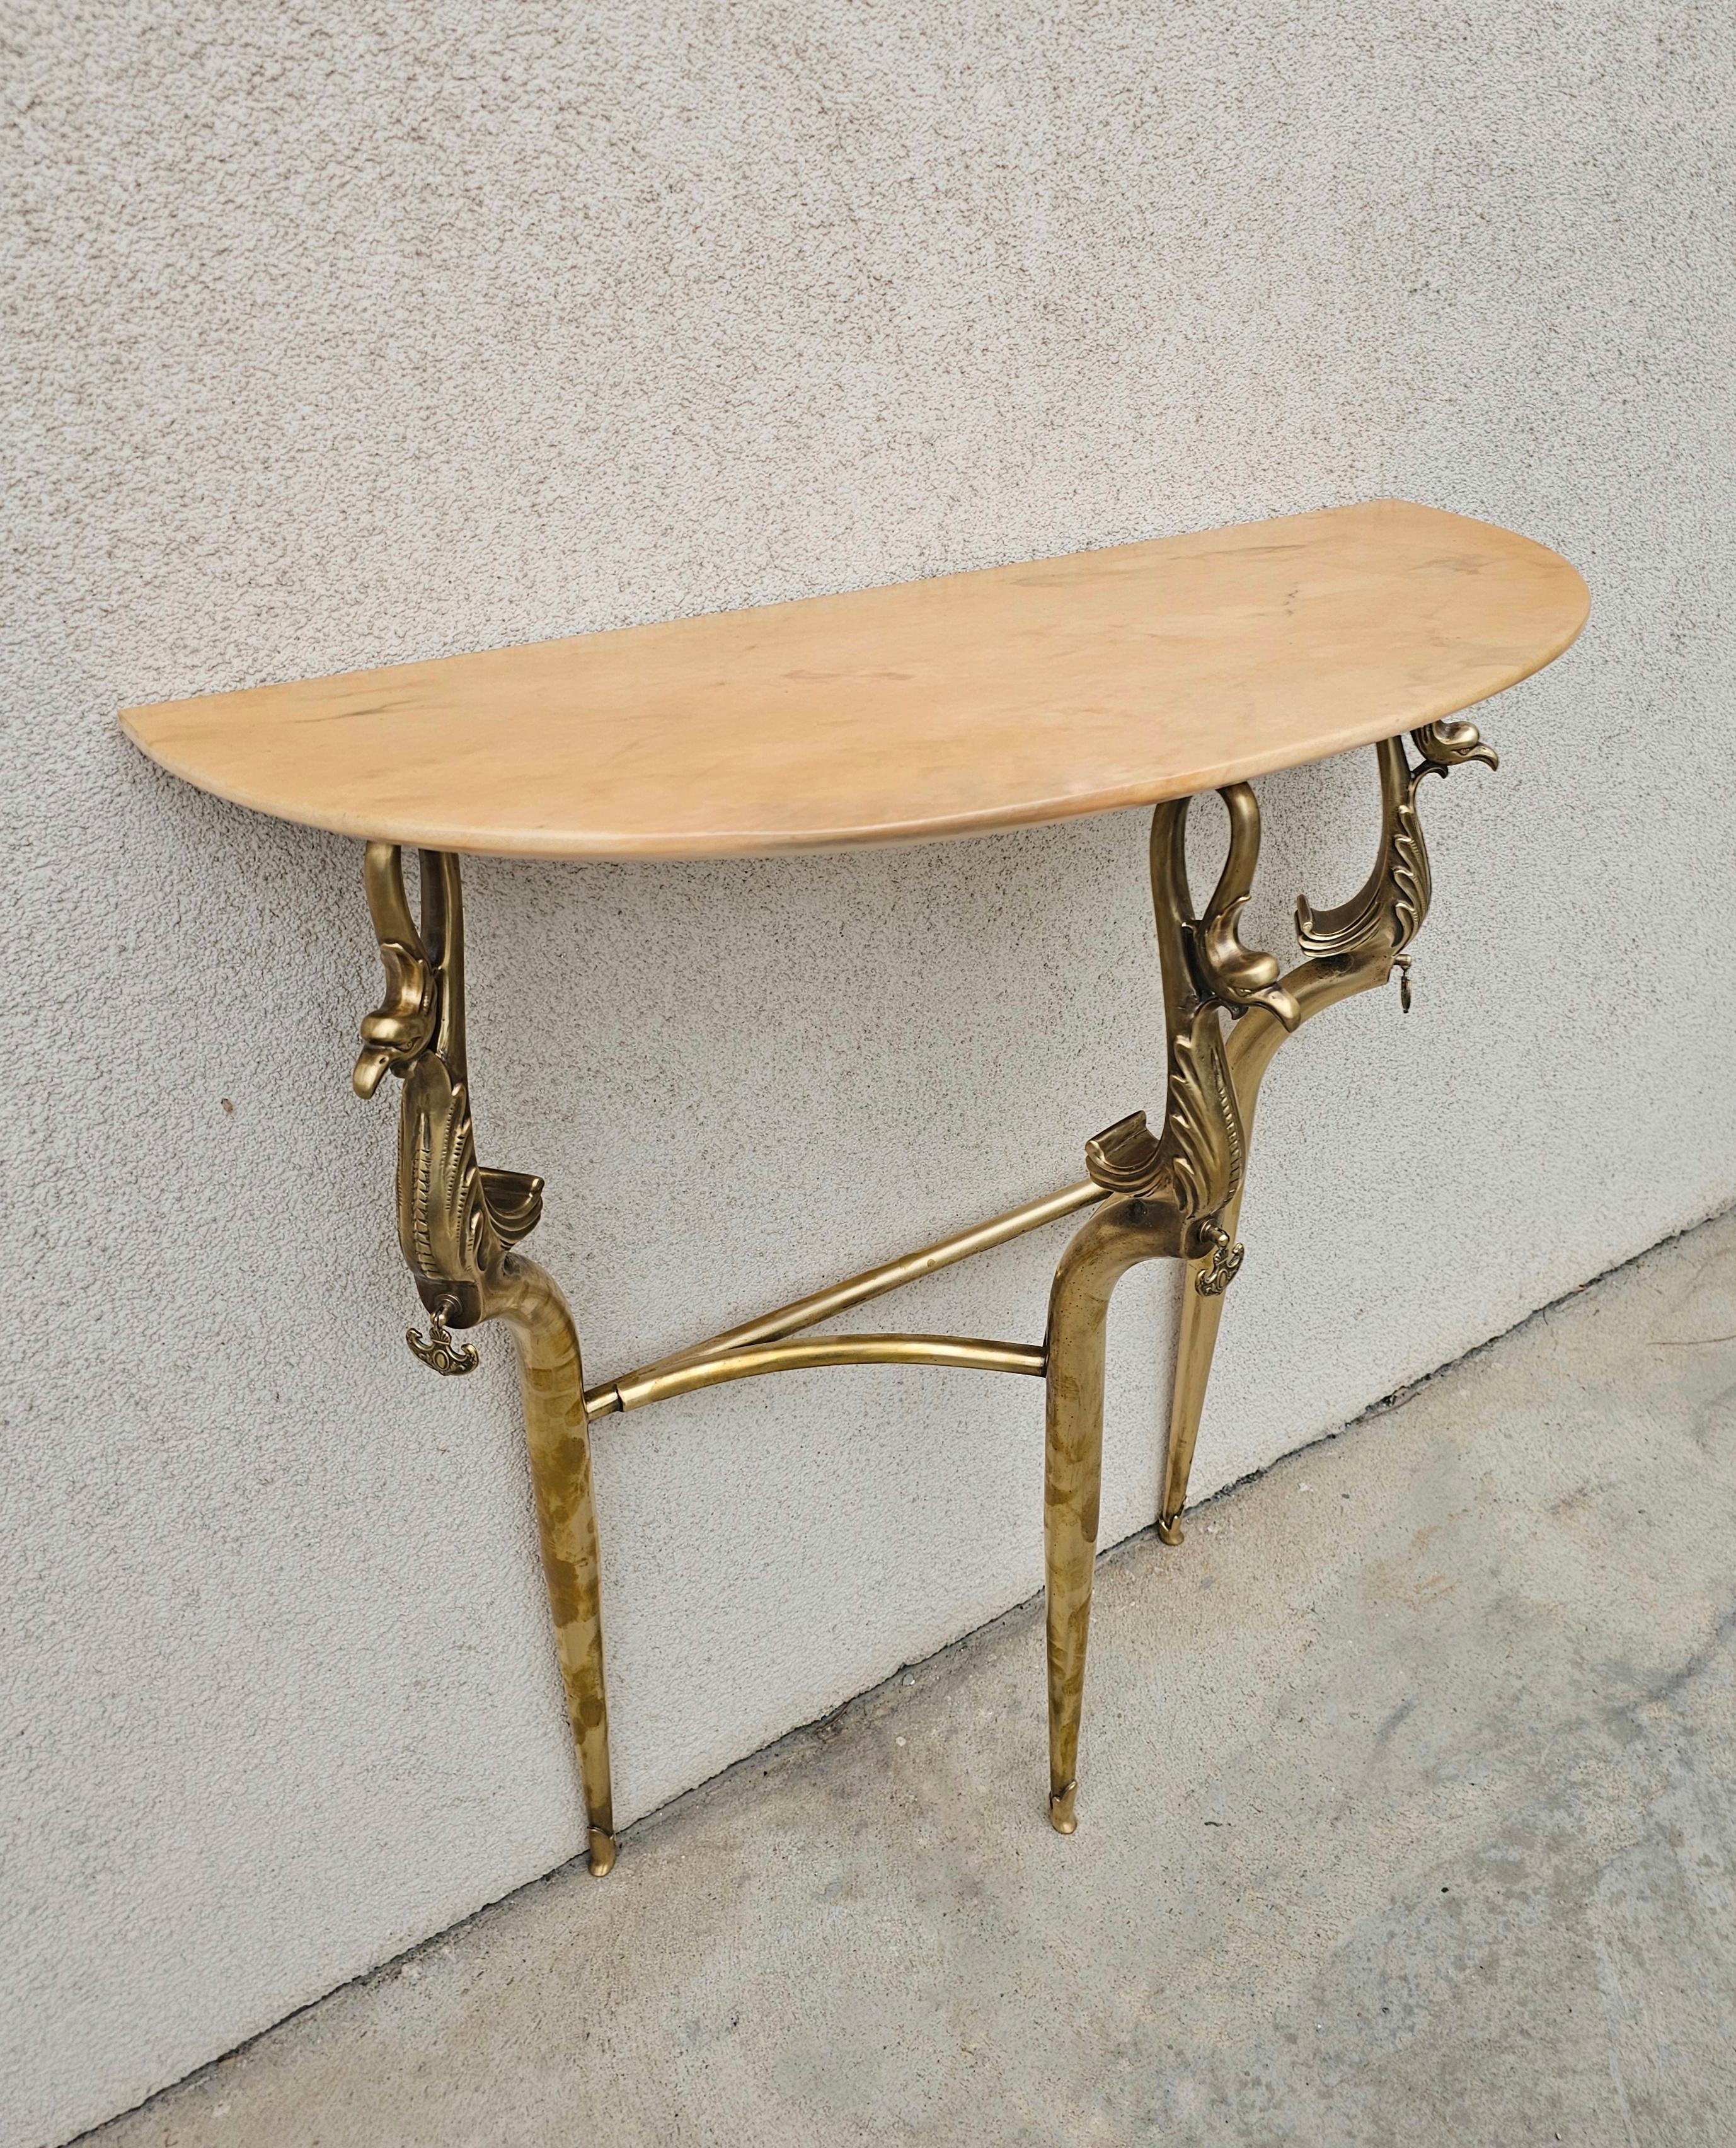 Mid-20th Century Hollywood Regency Brass Console Table with Semi-Circular Marble Top, Italy 1950s For Sale